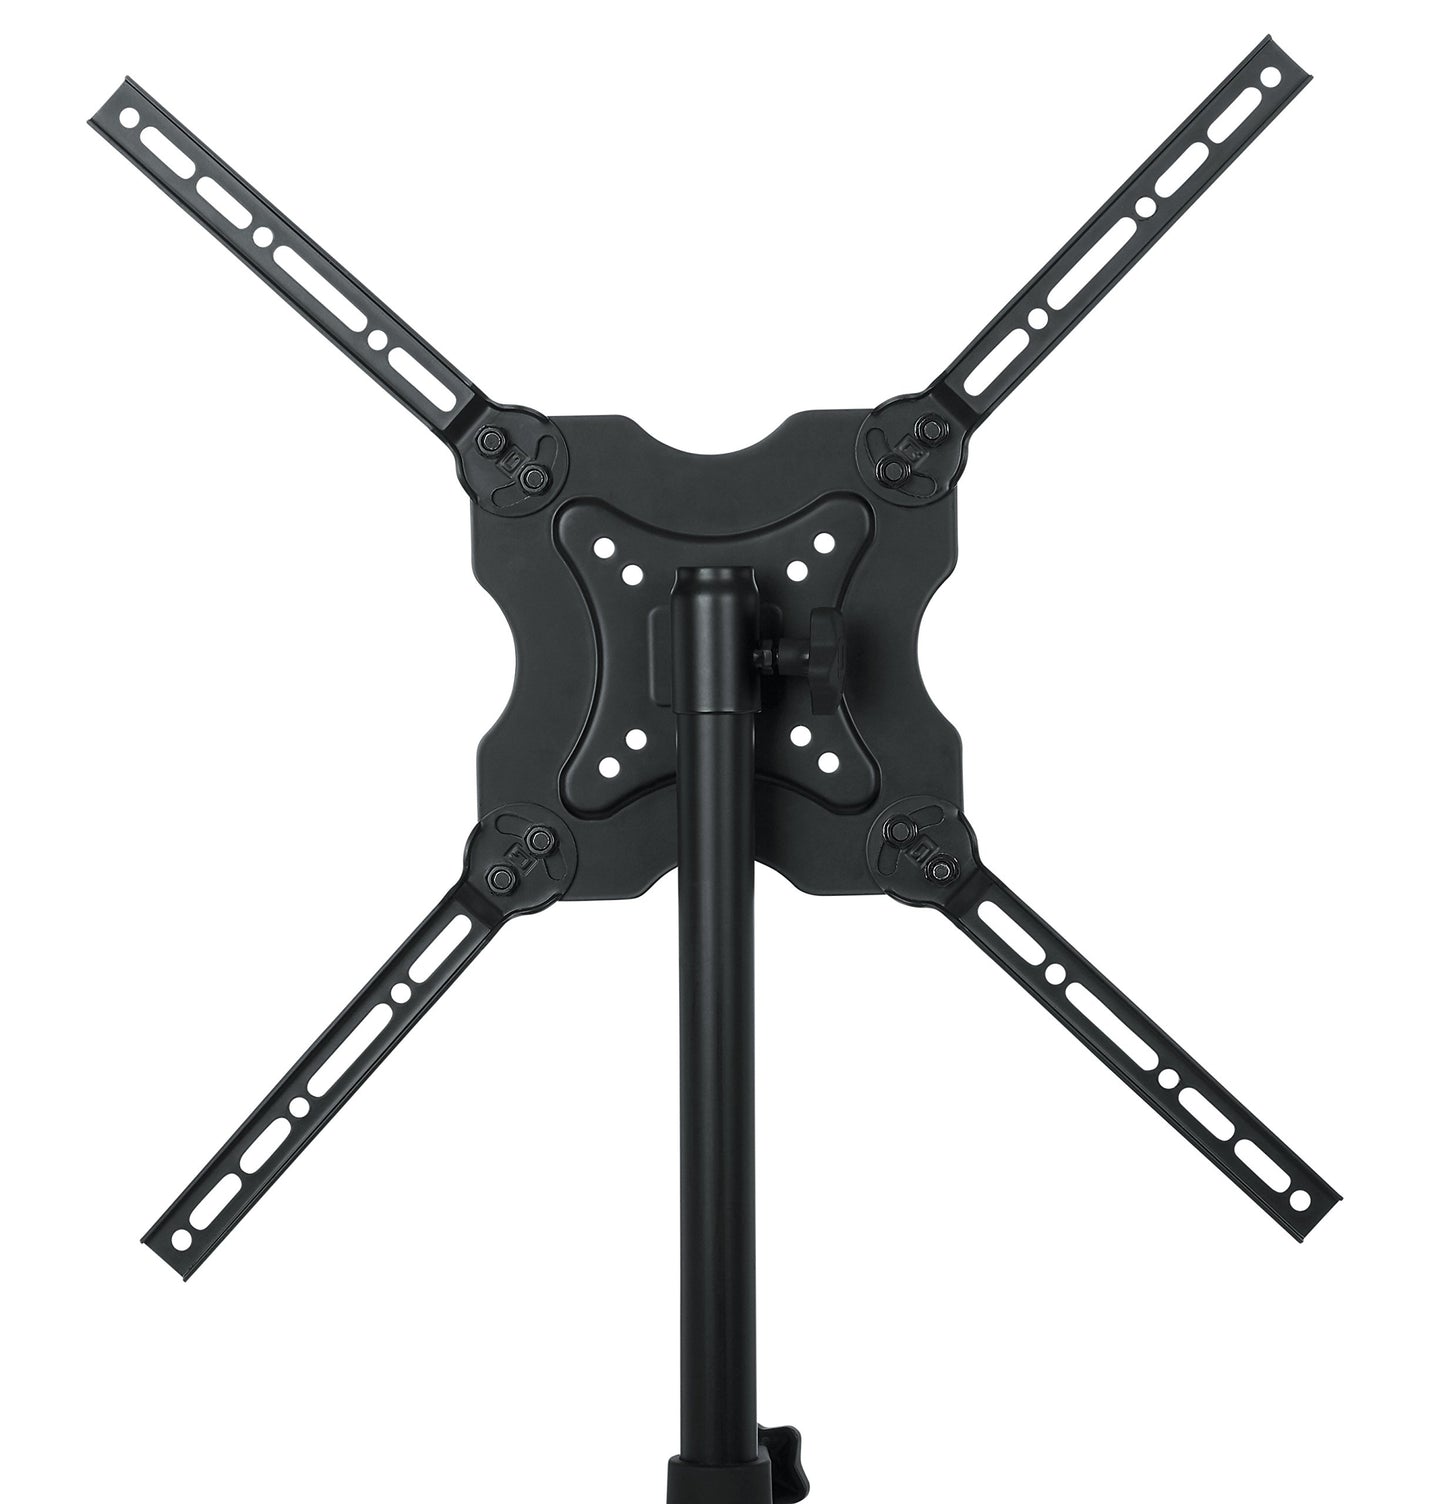 Gator Frameworks Deluxe Adjustable Quadpod LCD/LED TV Monitor Stand with Lift Piston; Fits Screens up to 65" (GFW-AV-LCD-25)